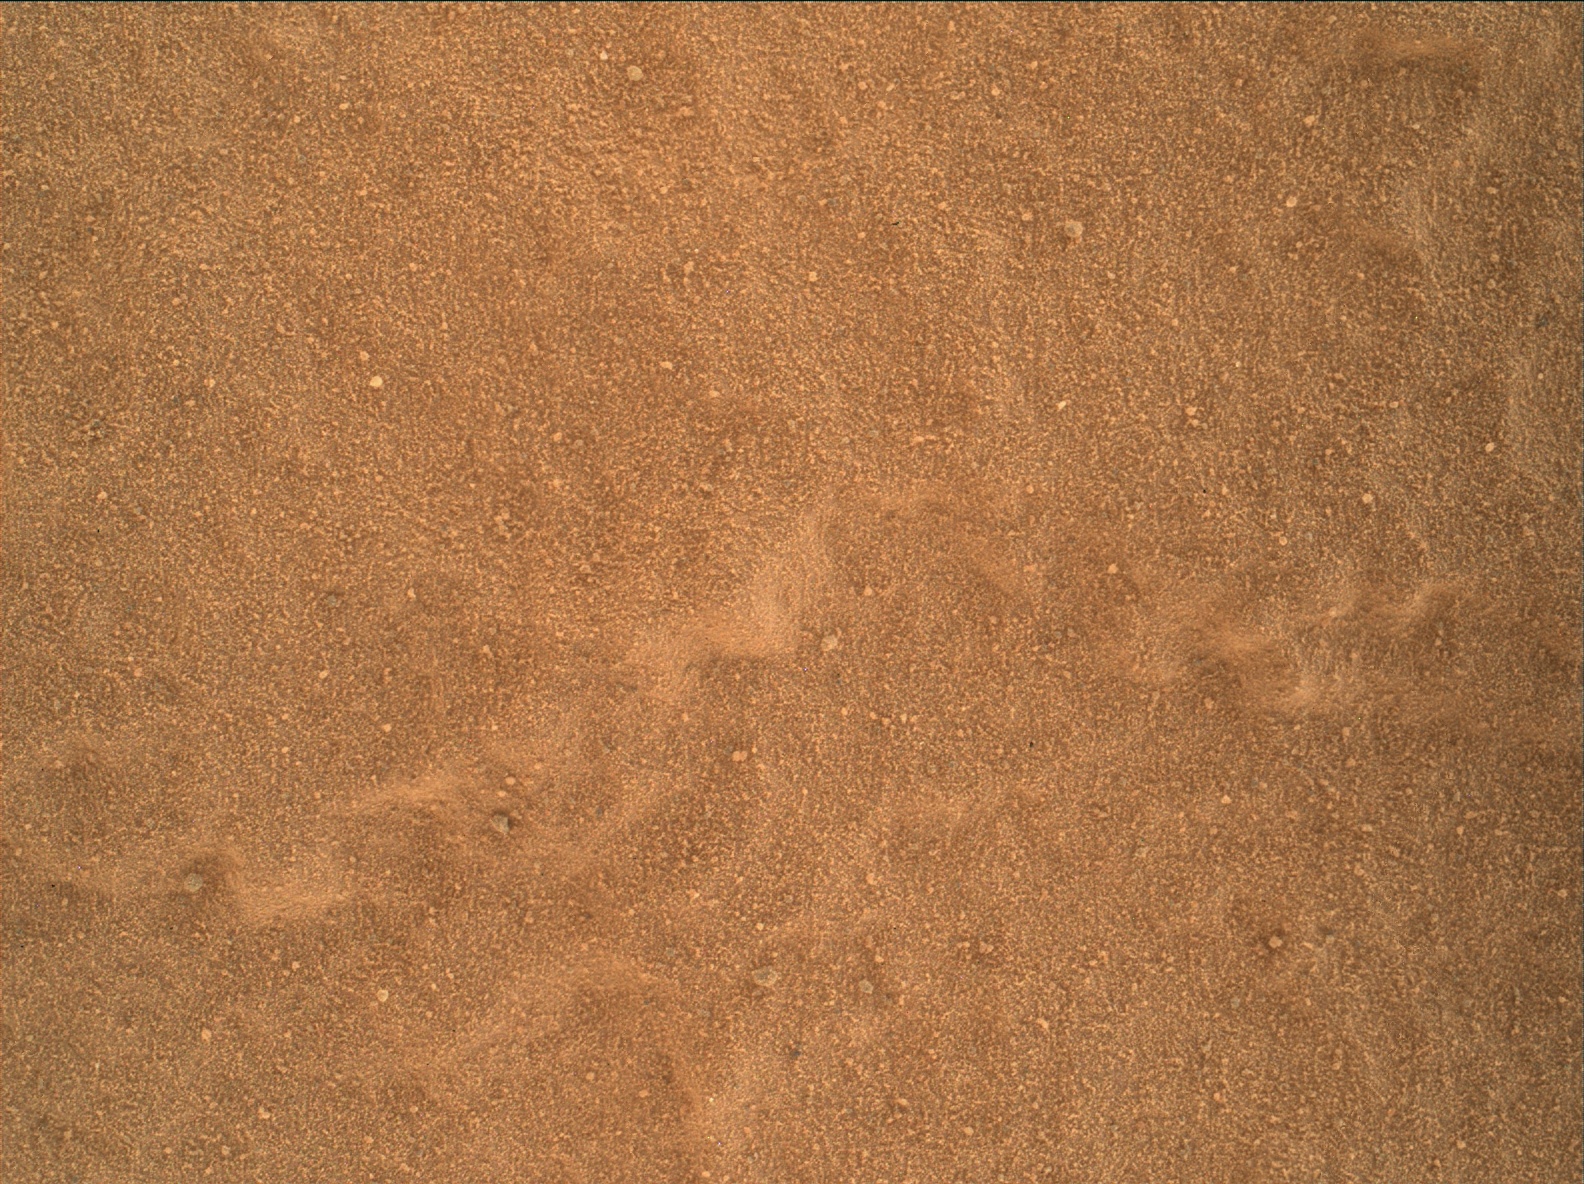 Nasa's Mars rover Curiosity acquired this image using its Mars Hand Lens Imager (MAHLI) on Sol 1833